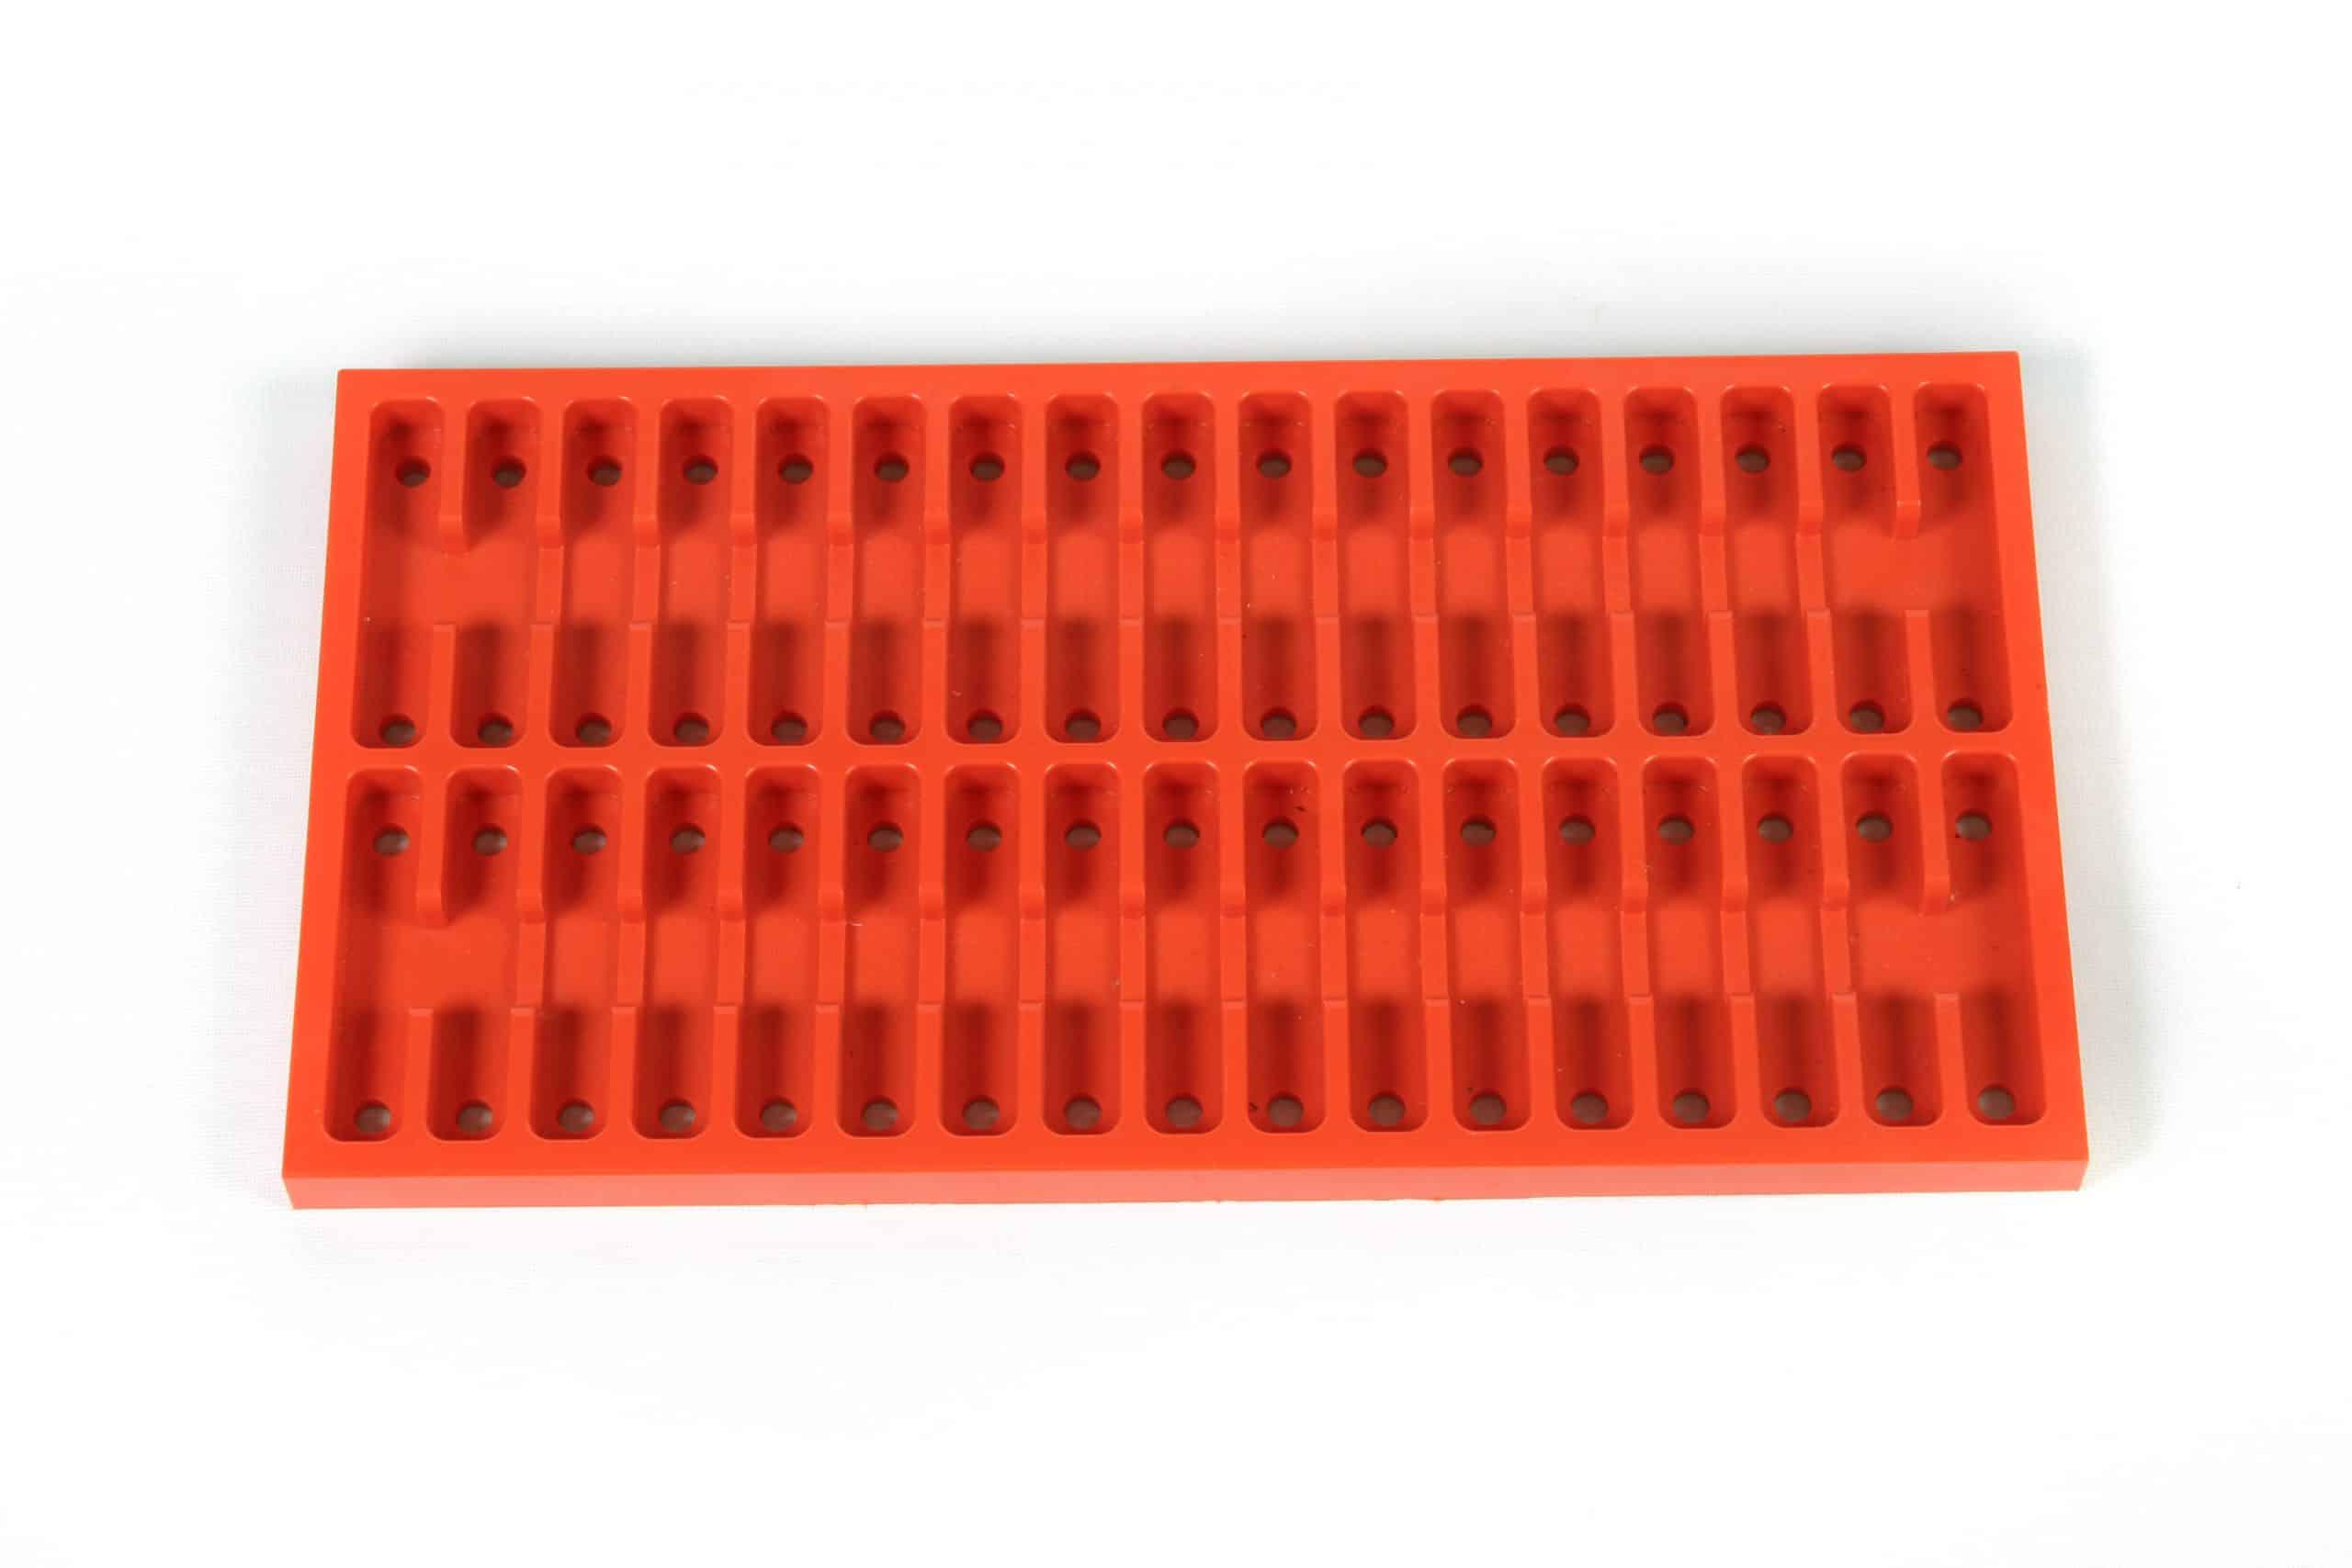 Polyurethane tool tray with 36 slots for drills.